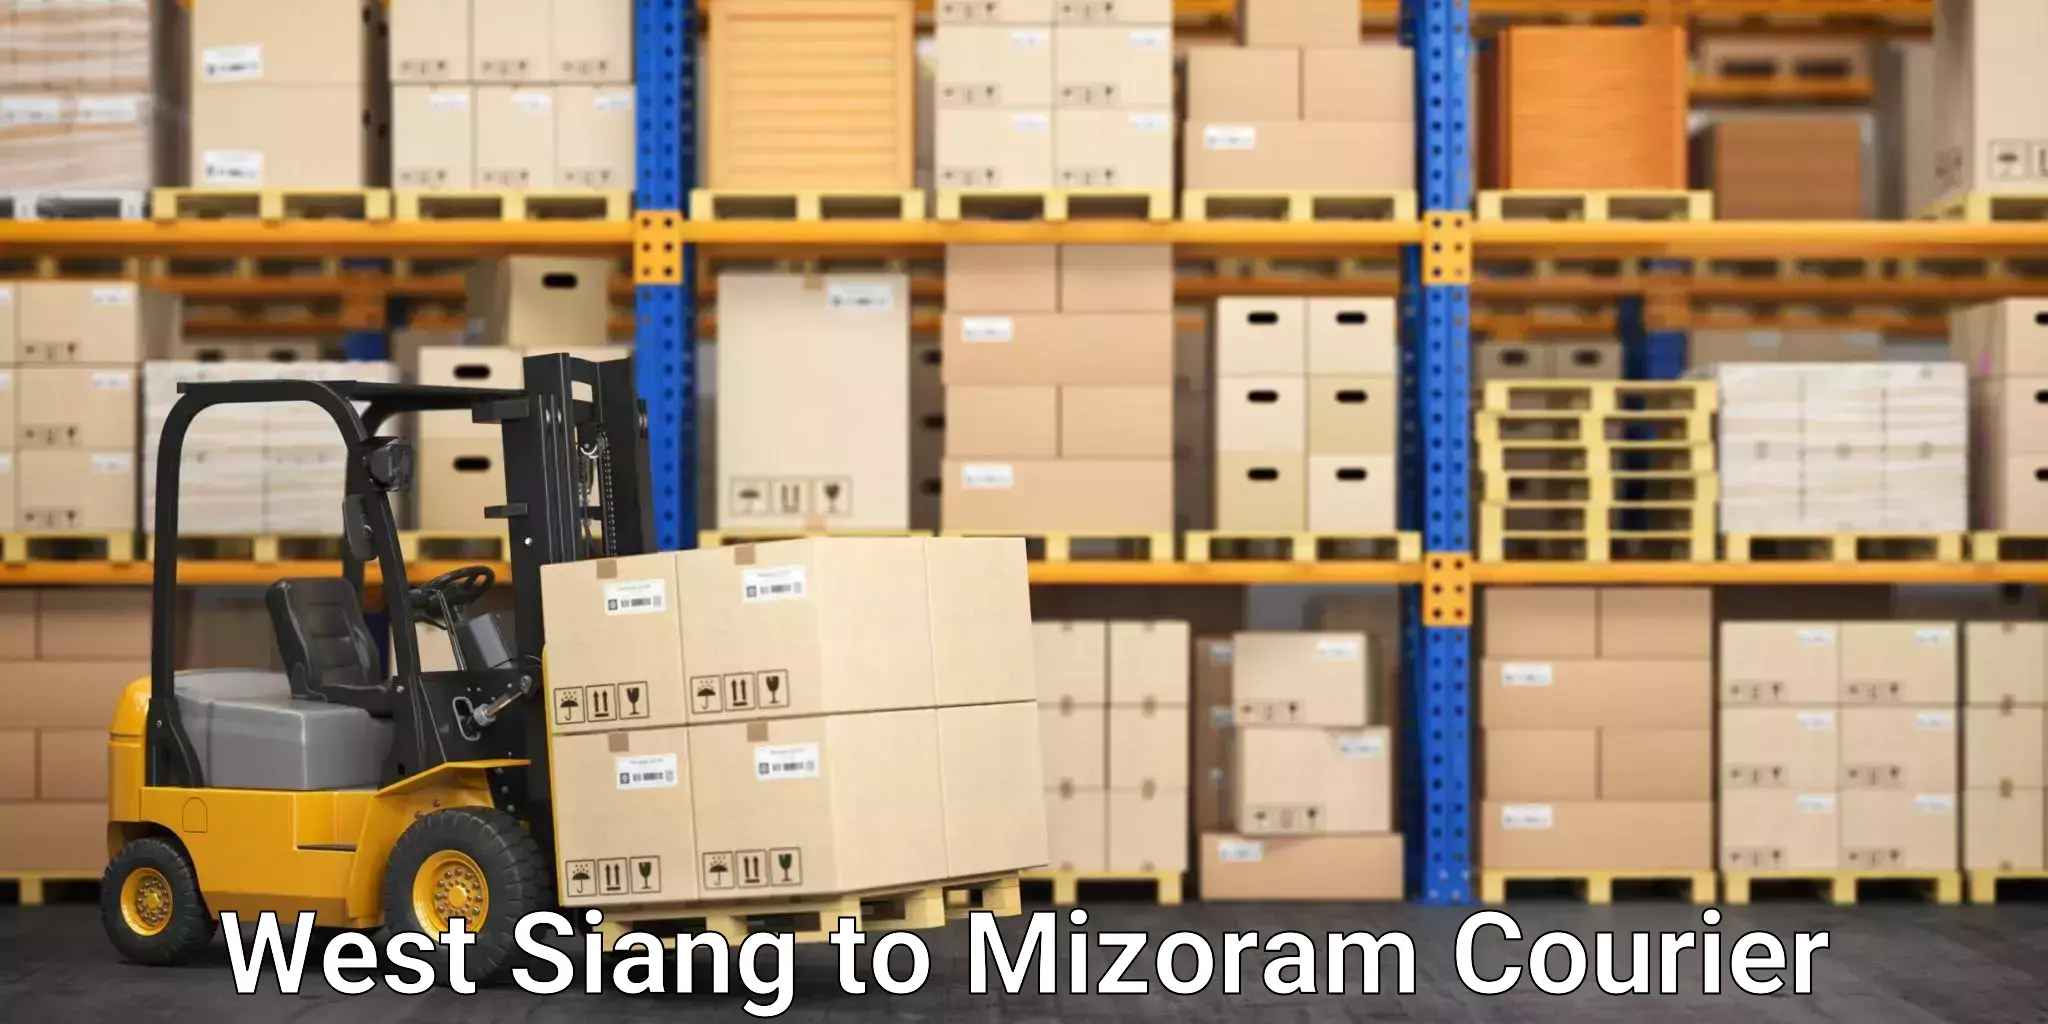 Urban courier service West Siang to Mizoram